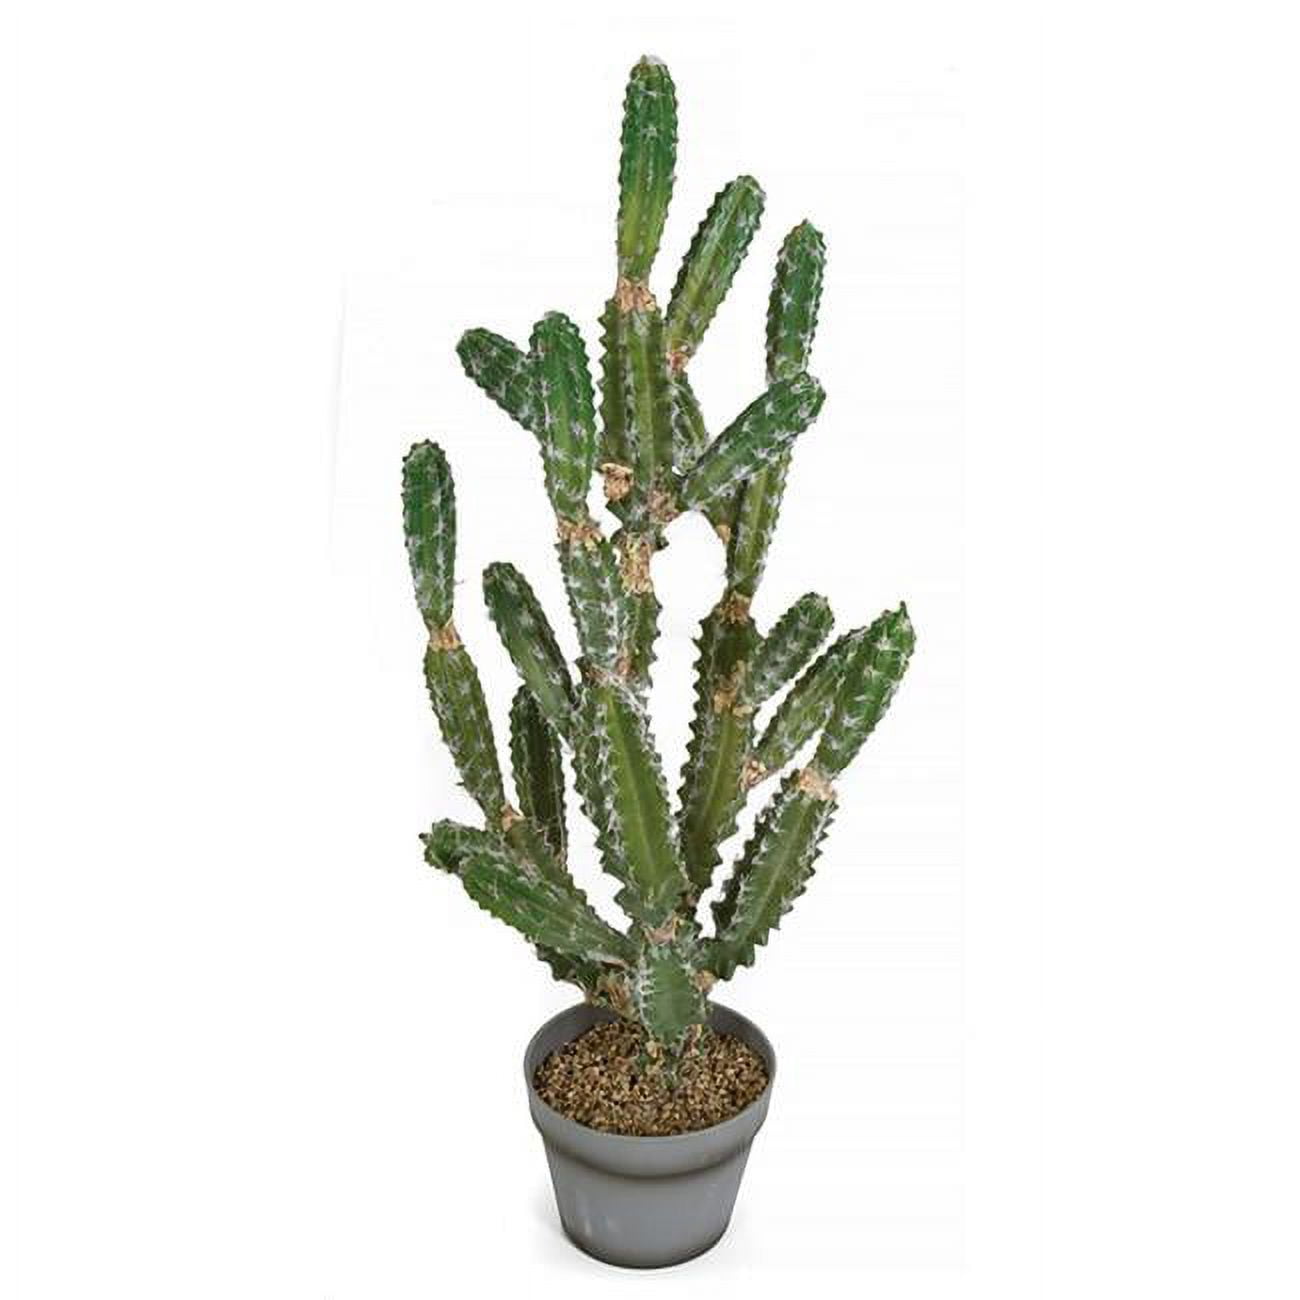 Picture of Autograph Foliages A-196050 33 in. Potted Cactus Plant with Light Needles, Green